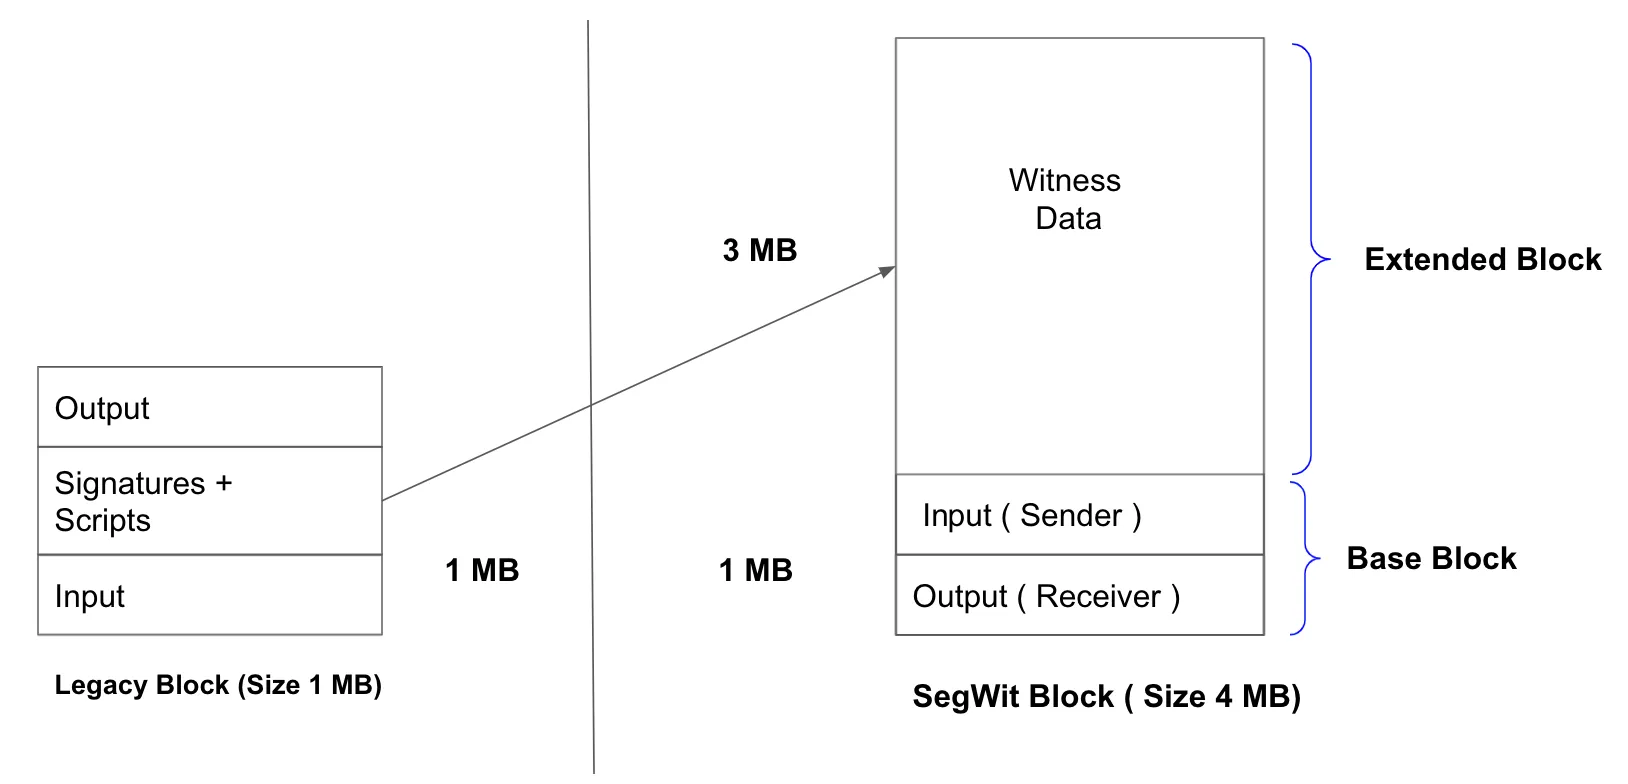 The main differences between the Legacy Block and the new SegWit Block